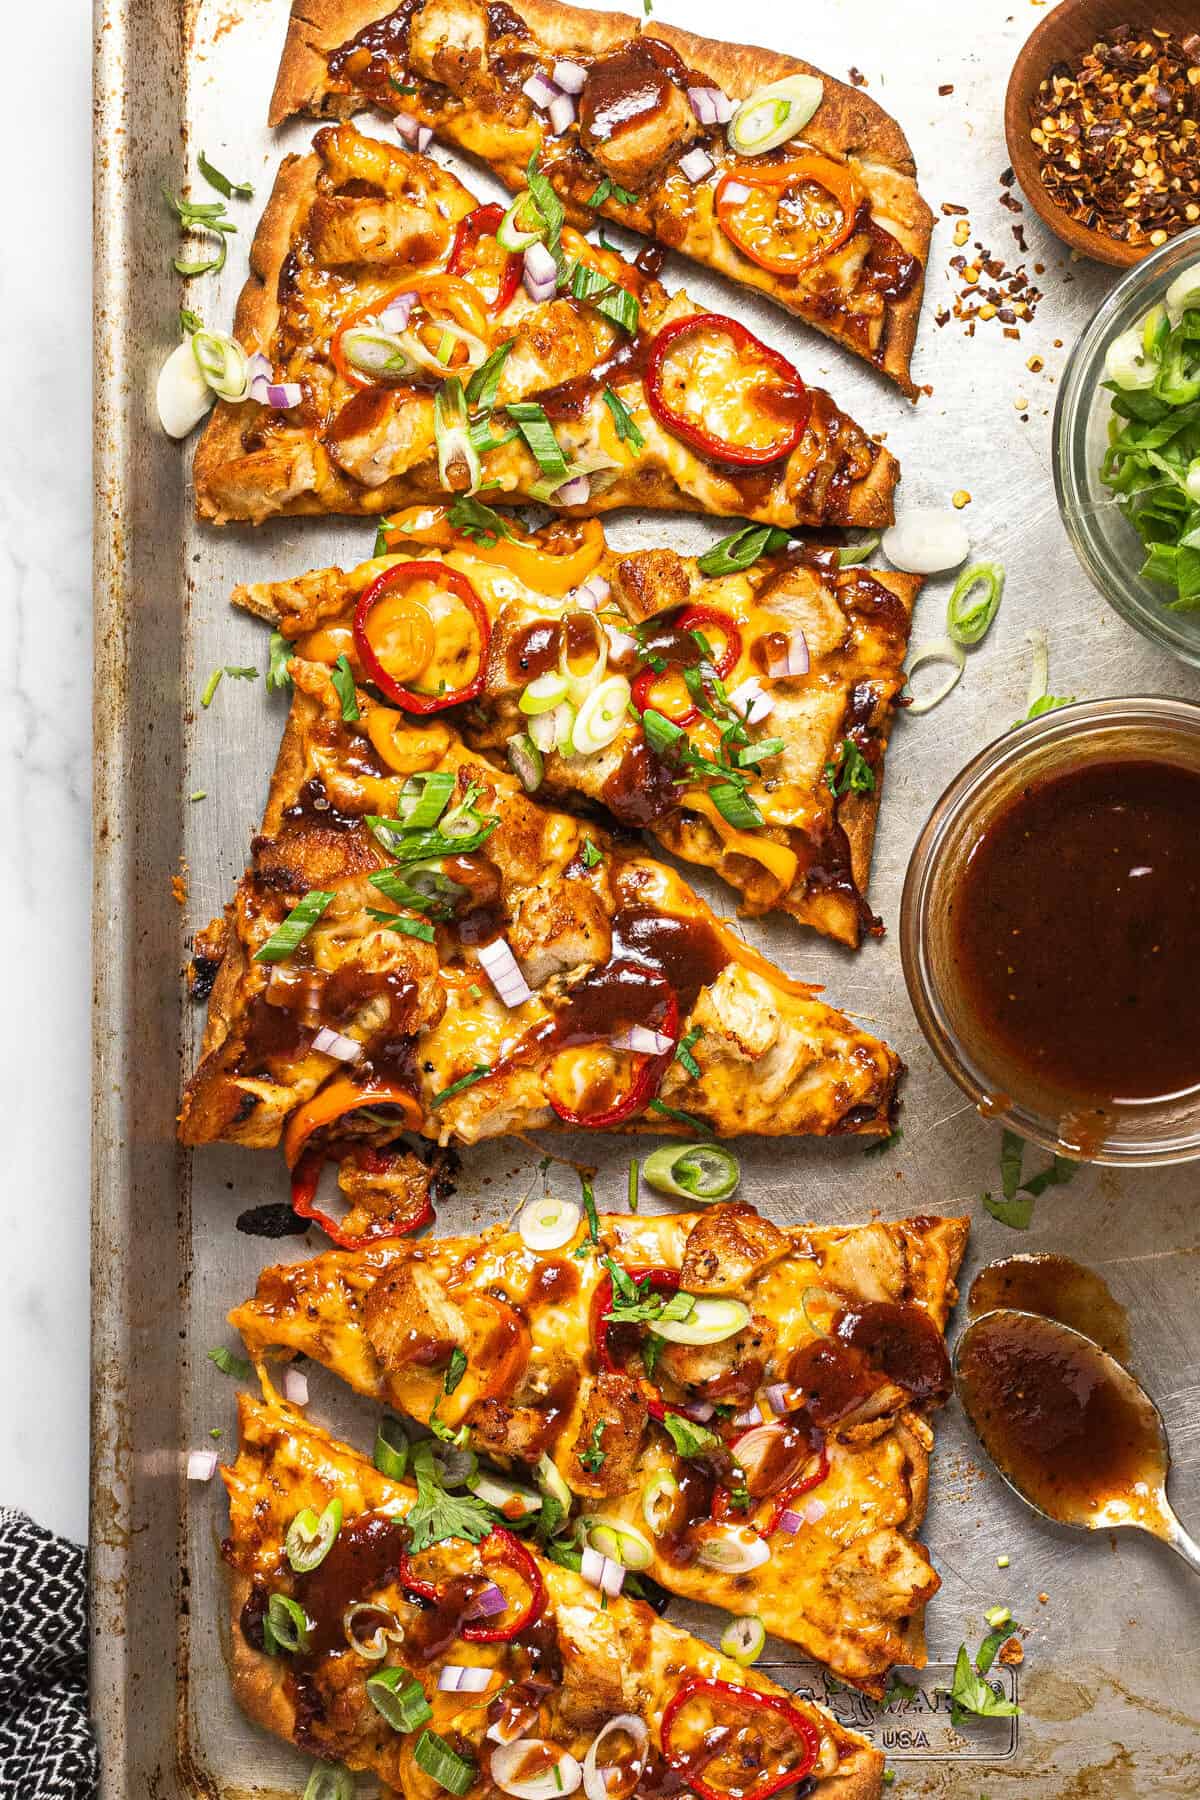 Baking sheet with a BBQ chicken flatbread garnished with sliced green onion